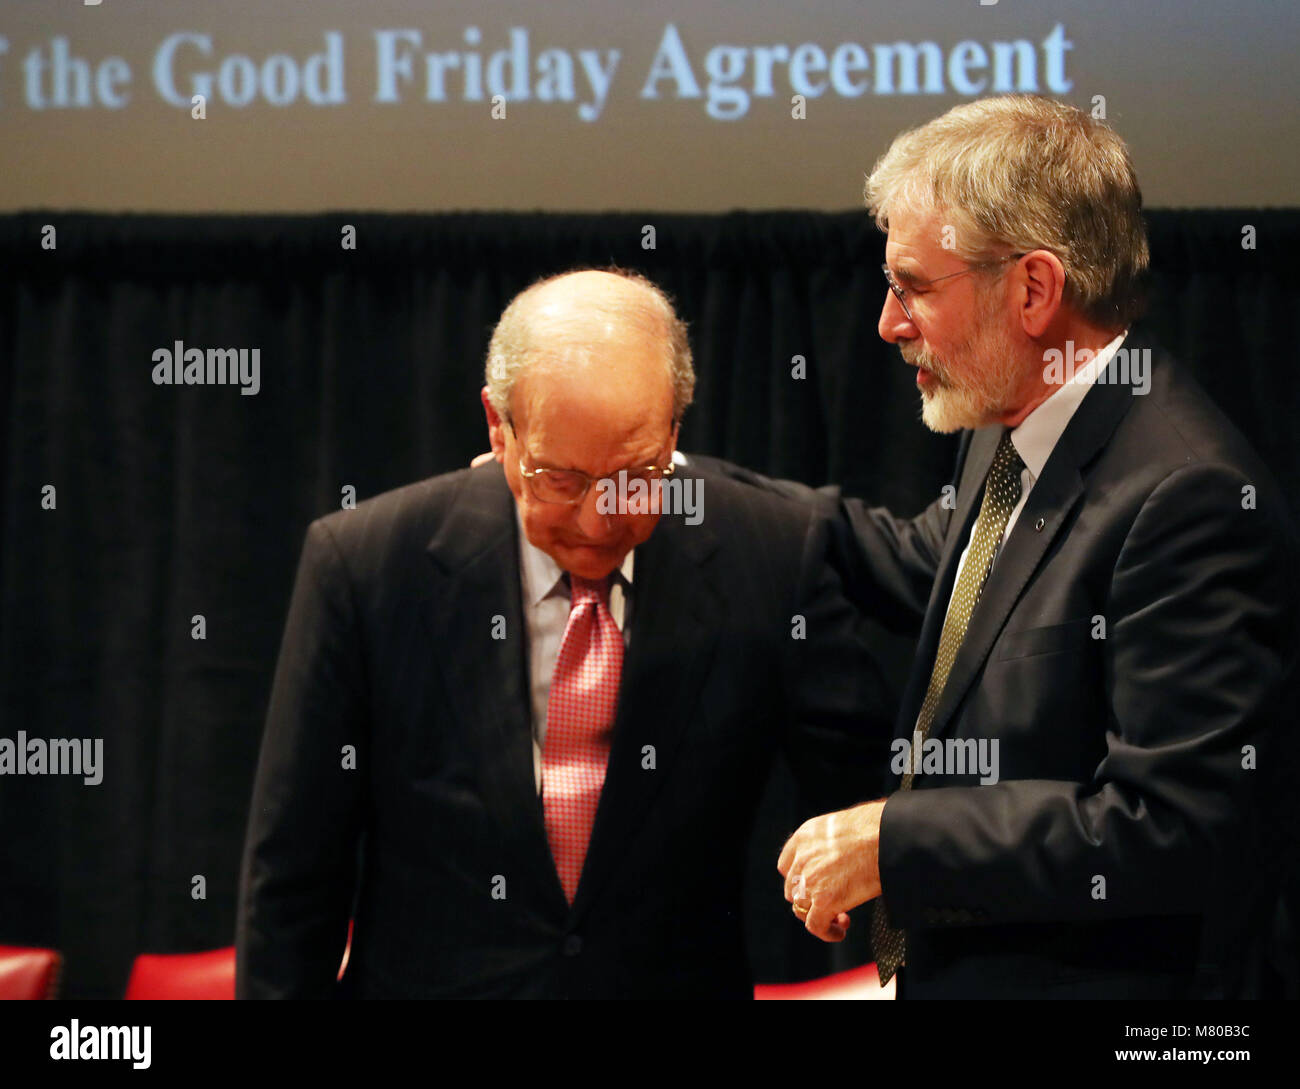 Senator George Mitchell and Gerry Adams at a Good Friday Agreement 20th anniversary event at the Library of Congress in Washington DC on day three of Taoiseach Leo Varadkar's week long visit to the United States of America. Stock Photo